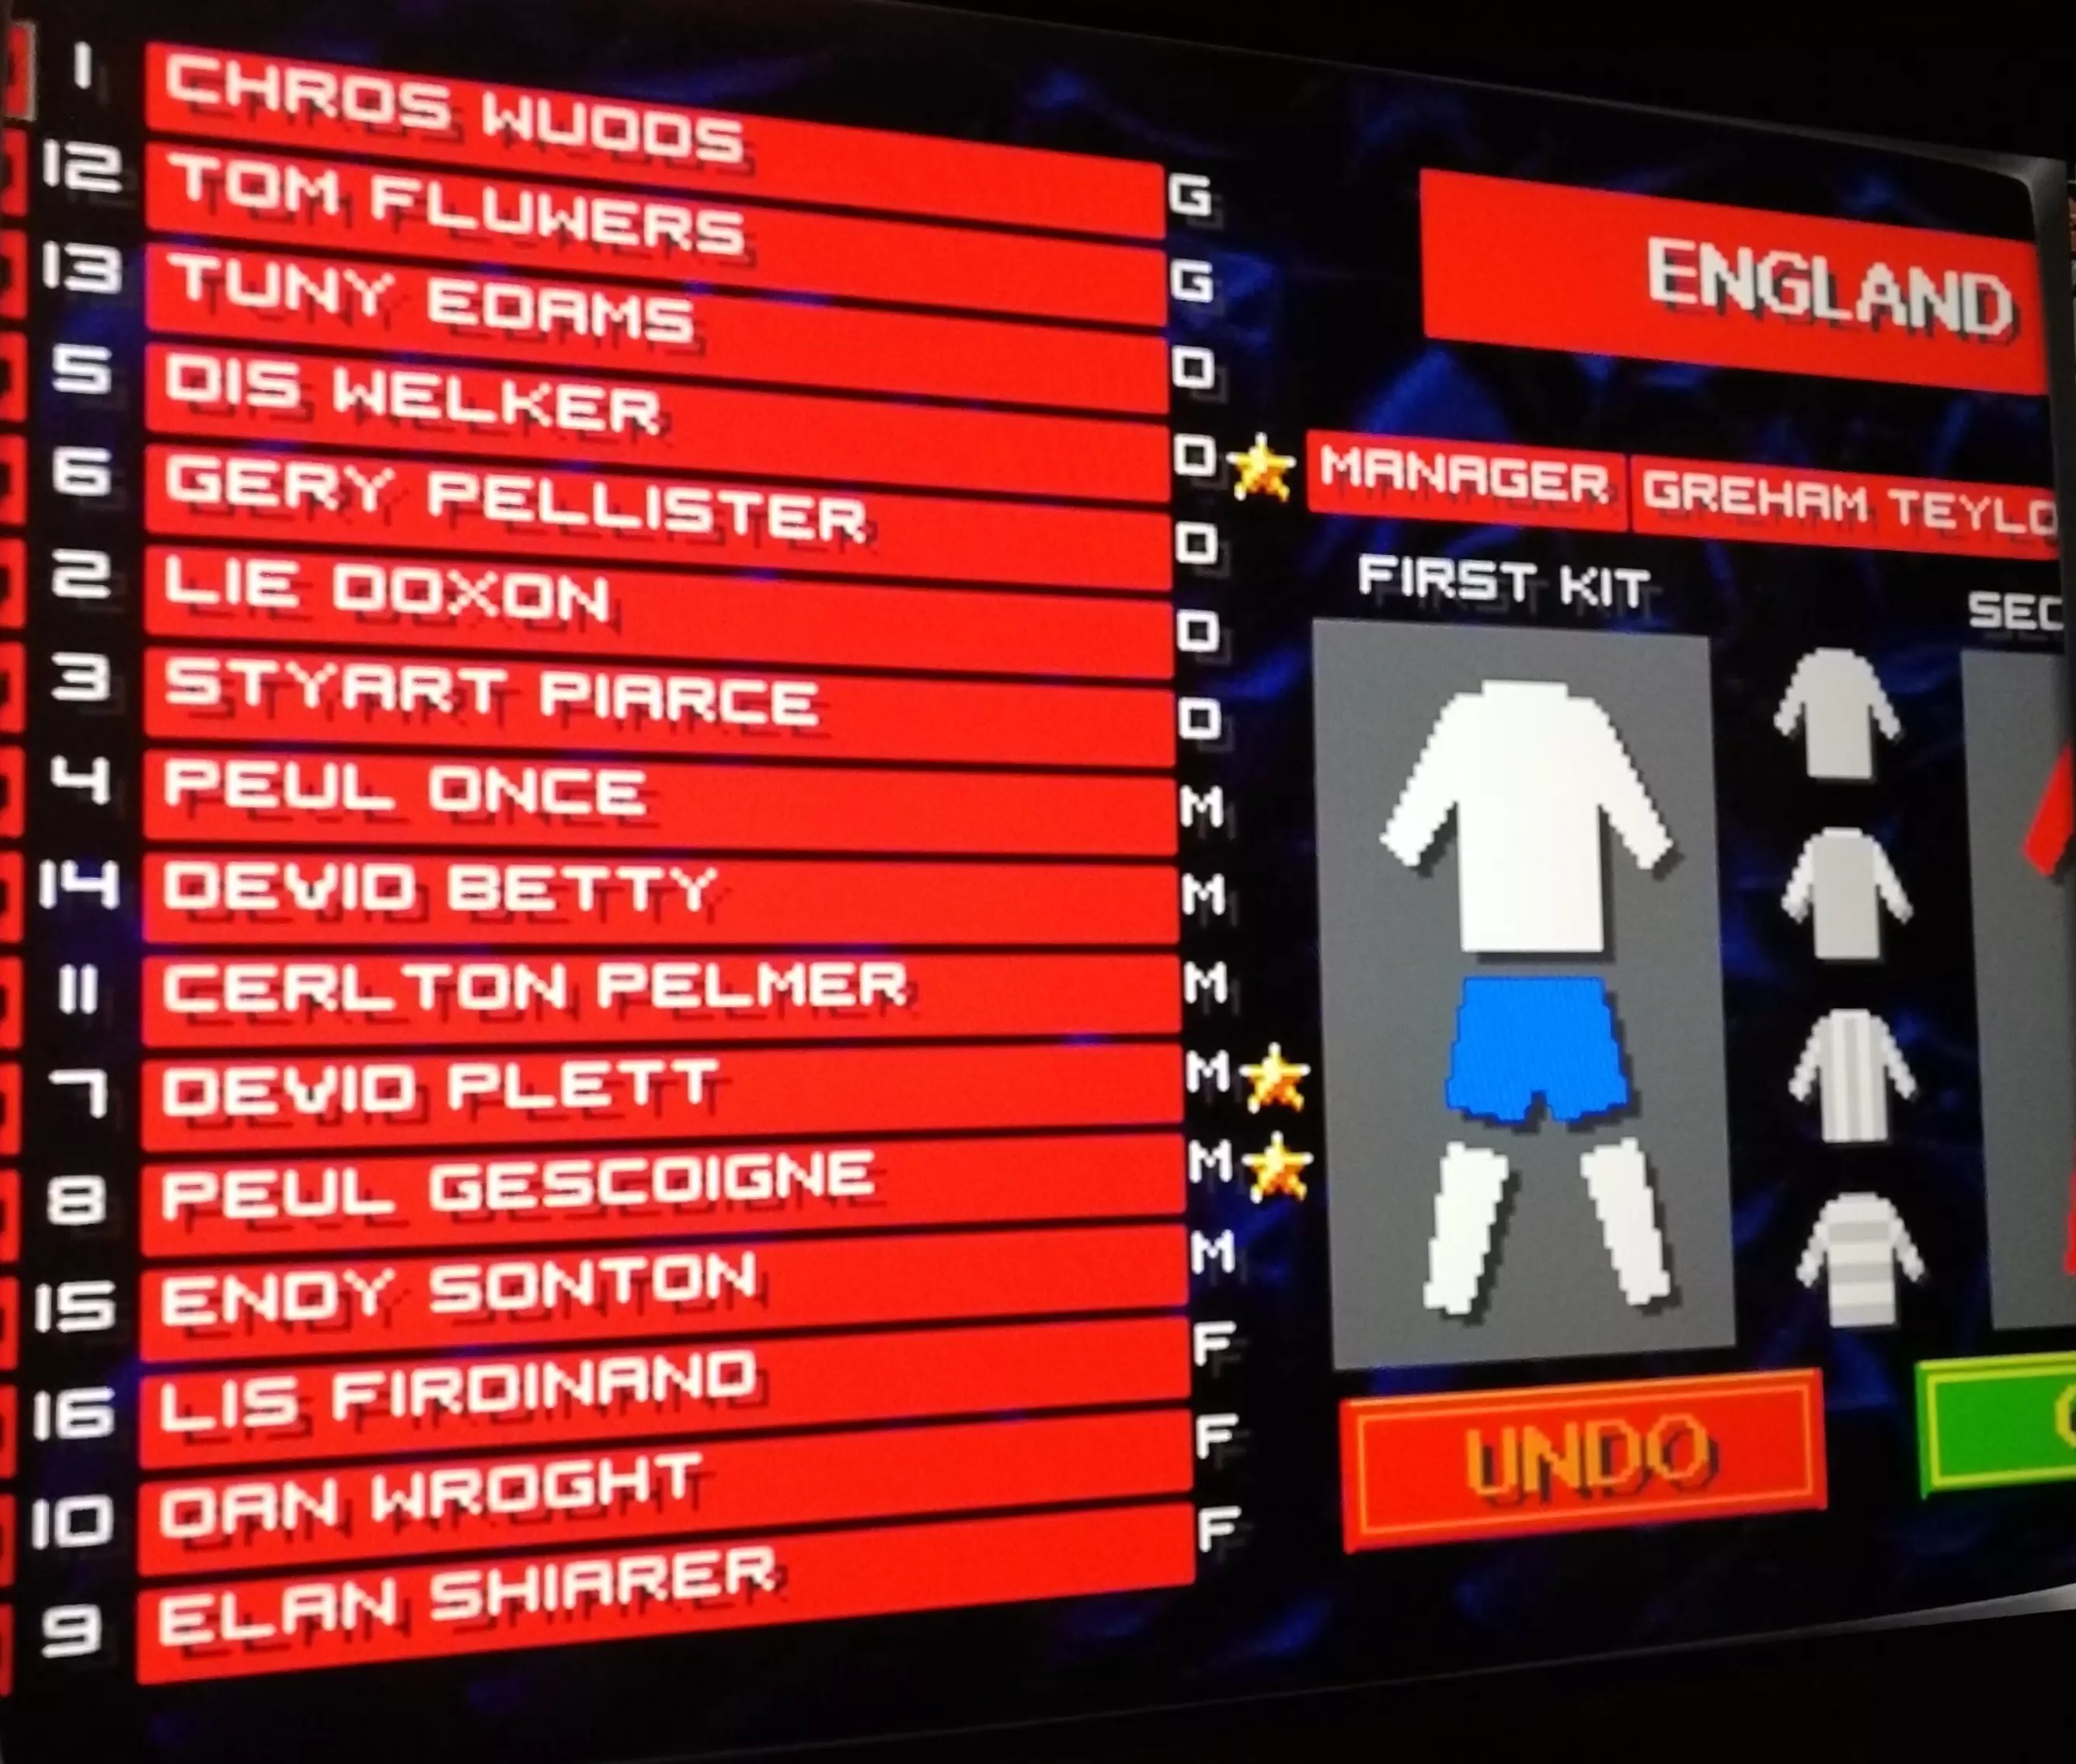 The England Squad of Sensible Soccer: European Champions /